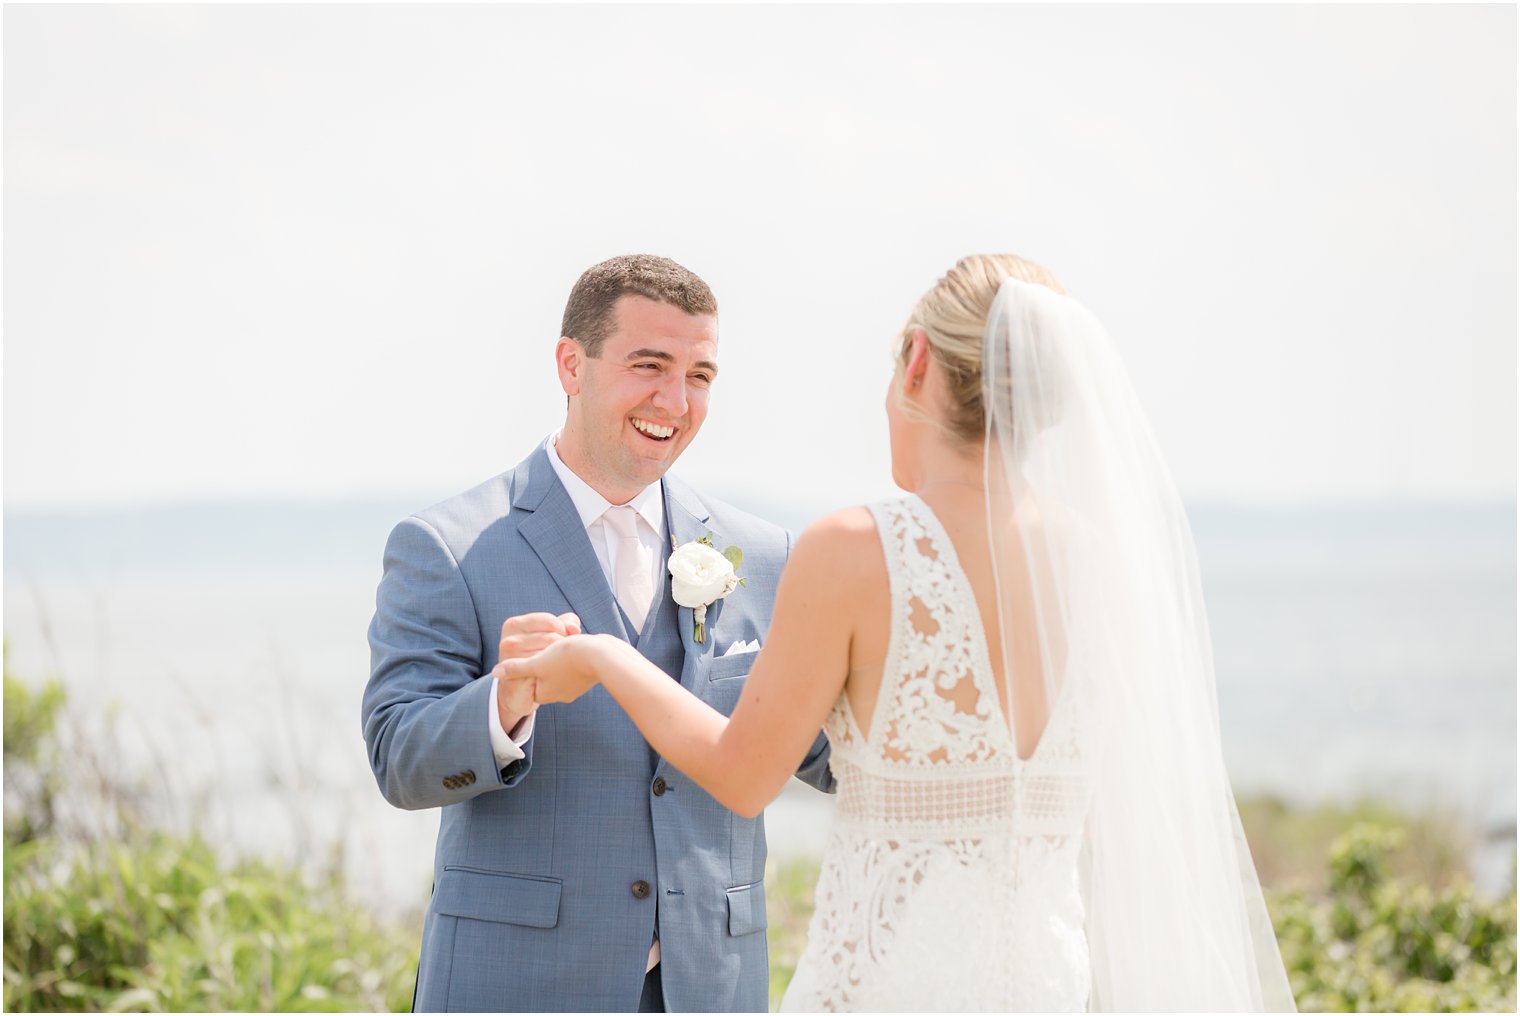 Idalia Photography captures bride and groom during first look